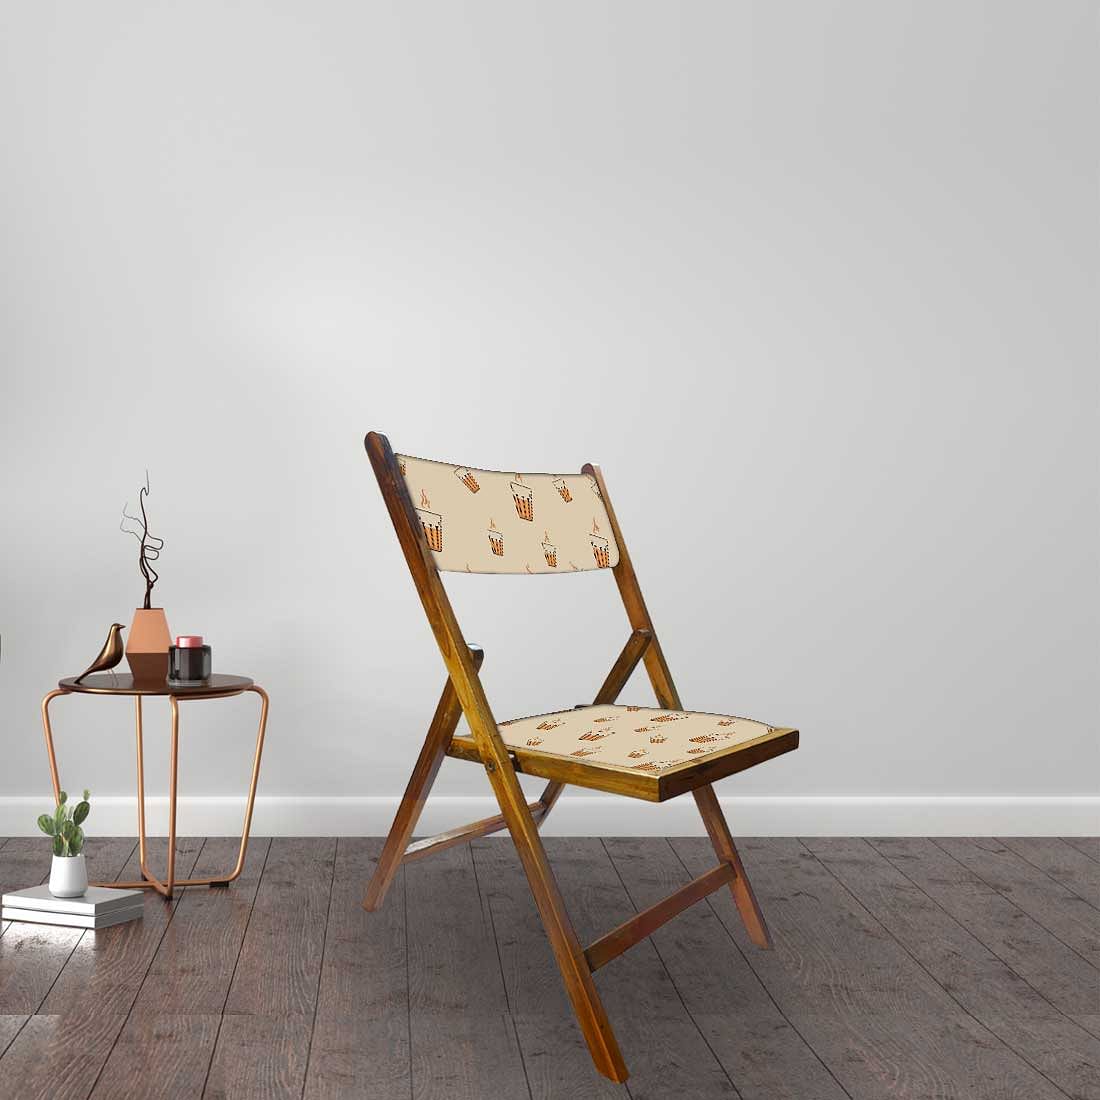 Nutcase Wooden Chair with Cushion For Living Room - Hot Tea Nutcase